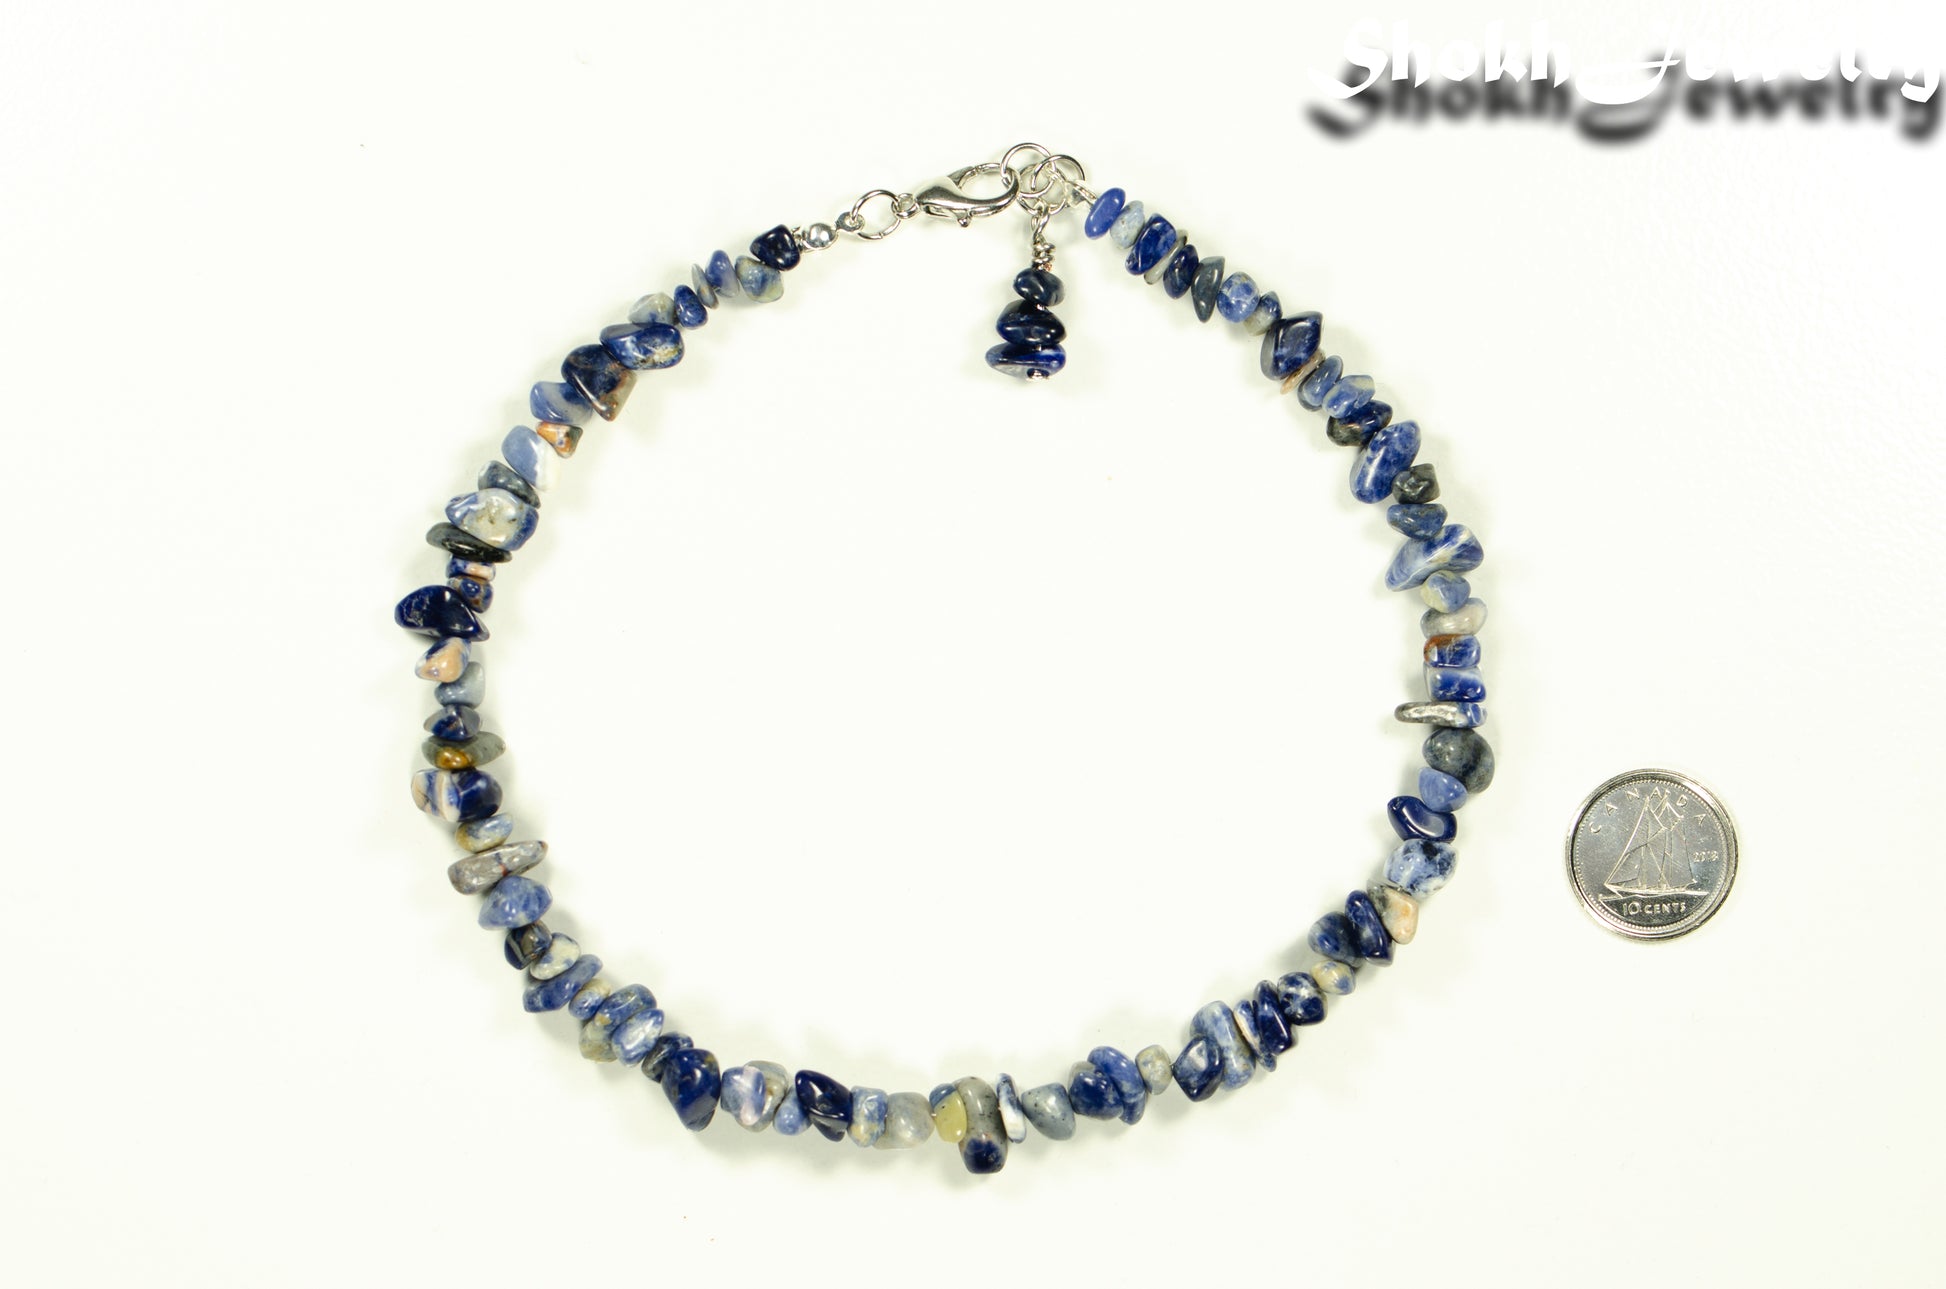 Natural Sodalite Crystal Chip Anklet beside a dime.